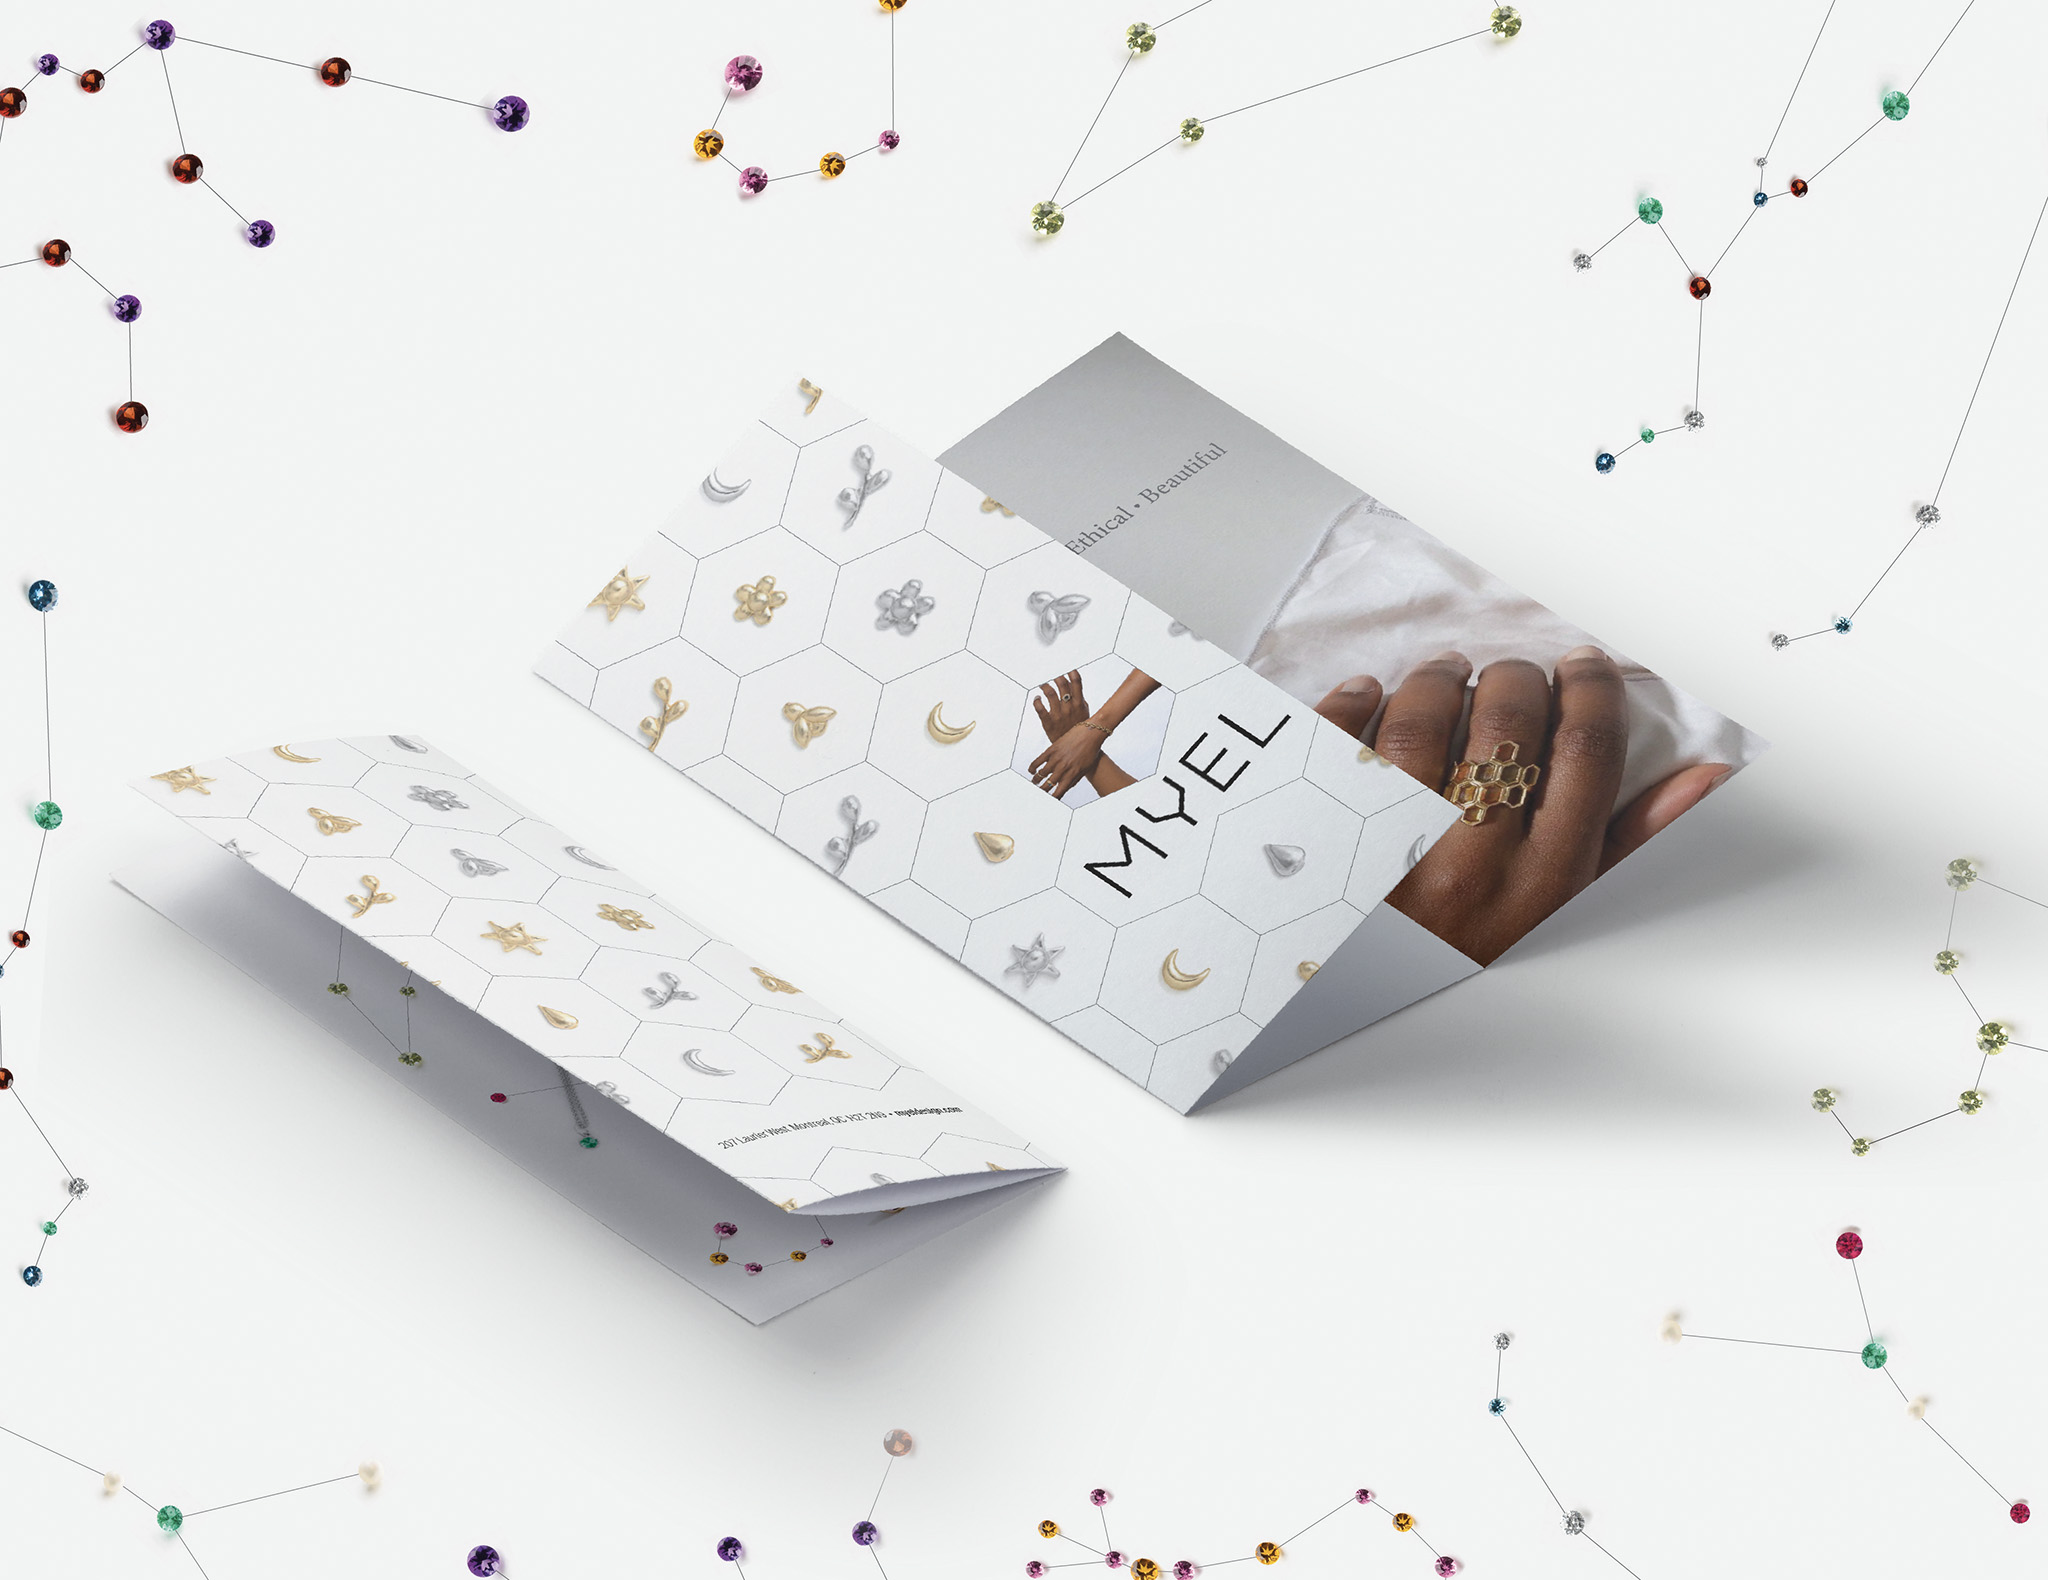 Mockup of promotional brochure for jewellery company Myel laid out with matching background.